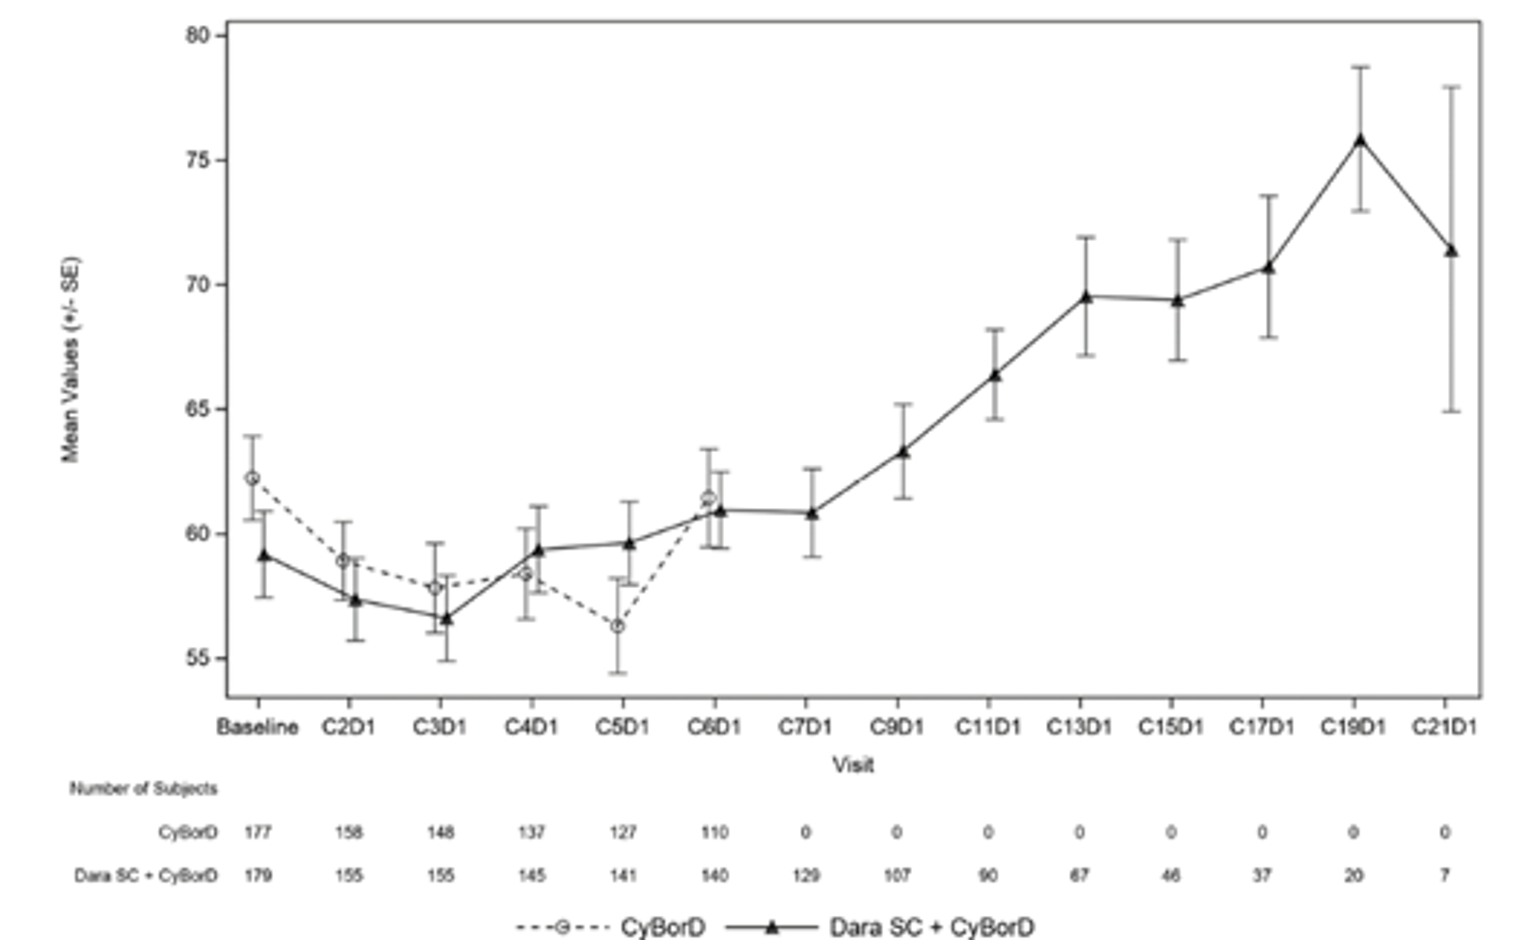 Plots of EORTC QLQ-C30 Global Health Status over time in the CyBorD and DCyBorD arms, with the x-axis as time from baseline, in months, and the y-axis as the mean (standard error) EORTC QLQ-C30 GHS scores. Mean scores show a general downward trend in the CyBorD arm through cycle 5 and a general upward trend through cycle 19 in the DCyBorD arm.